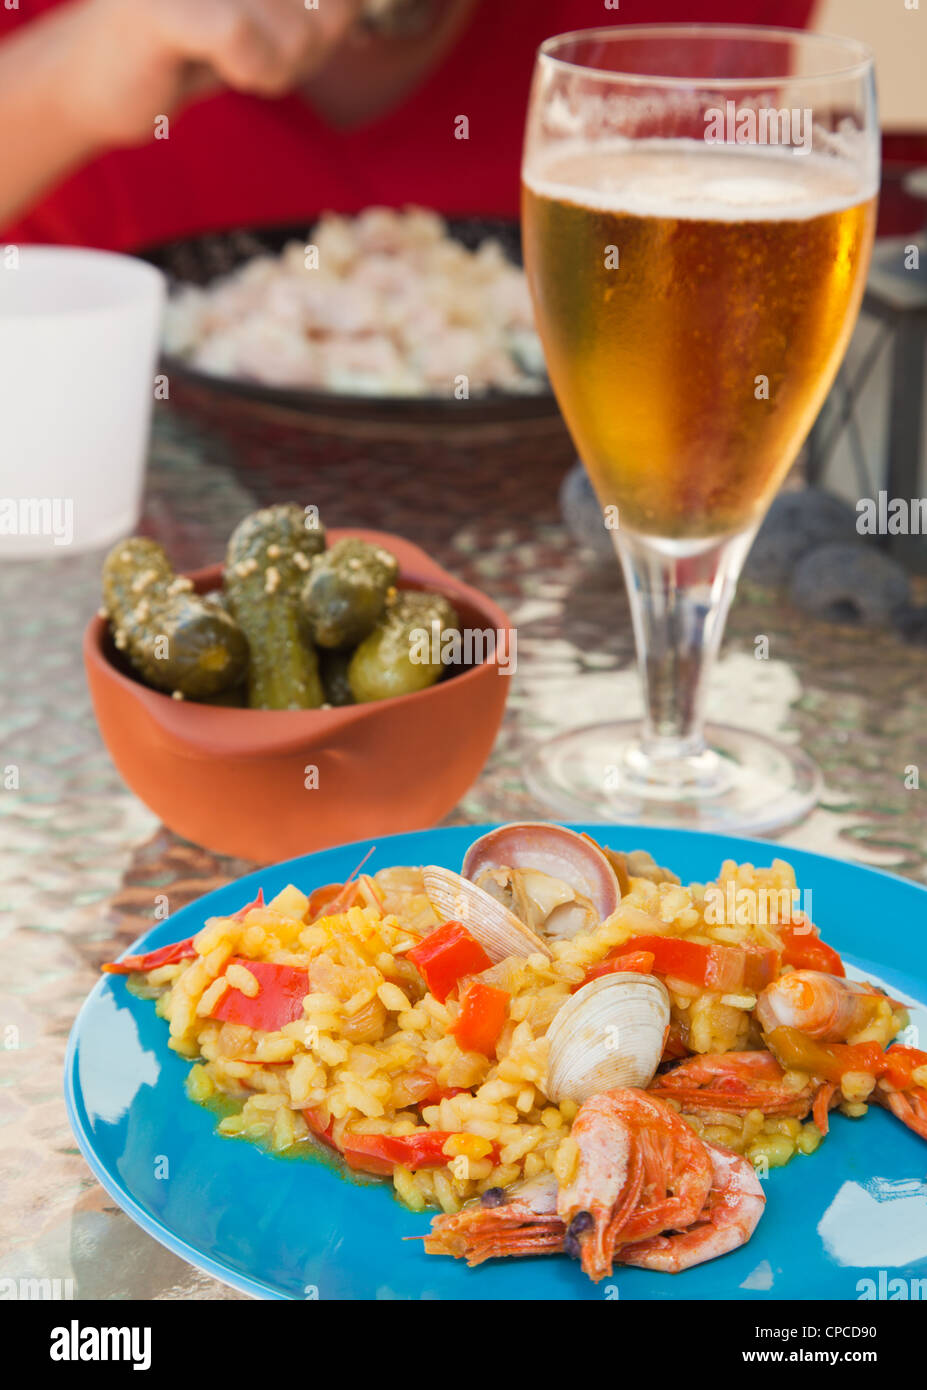 seafood paella on a bright plate, set outdoors Stock Photo